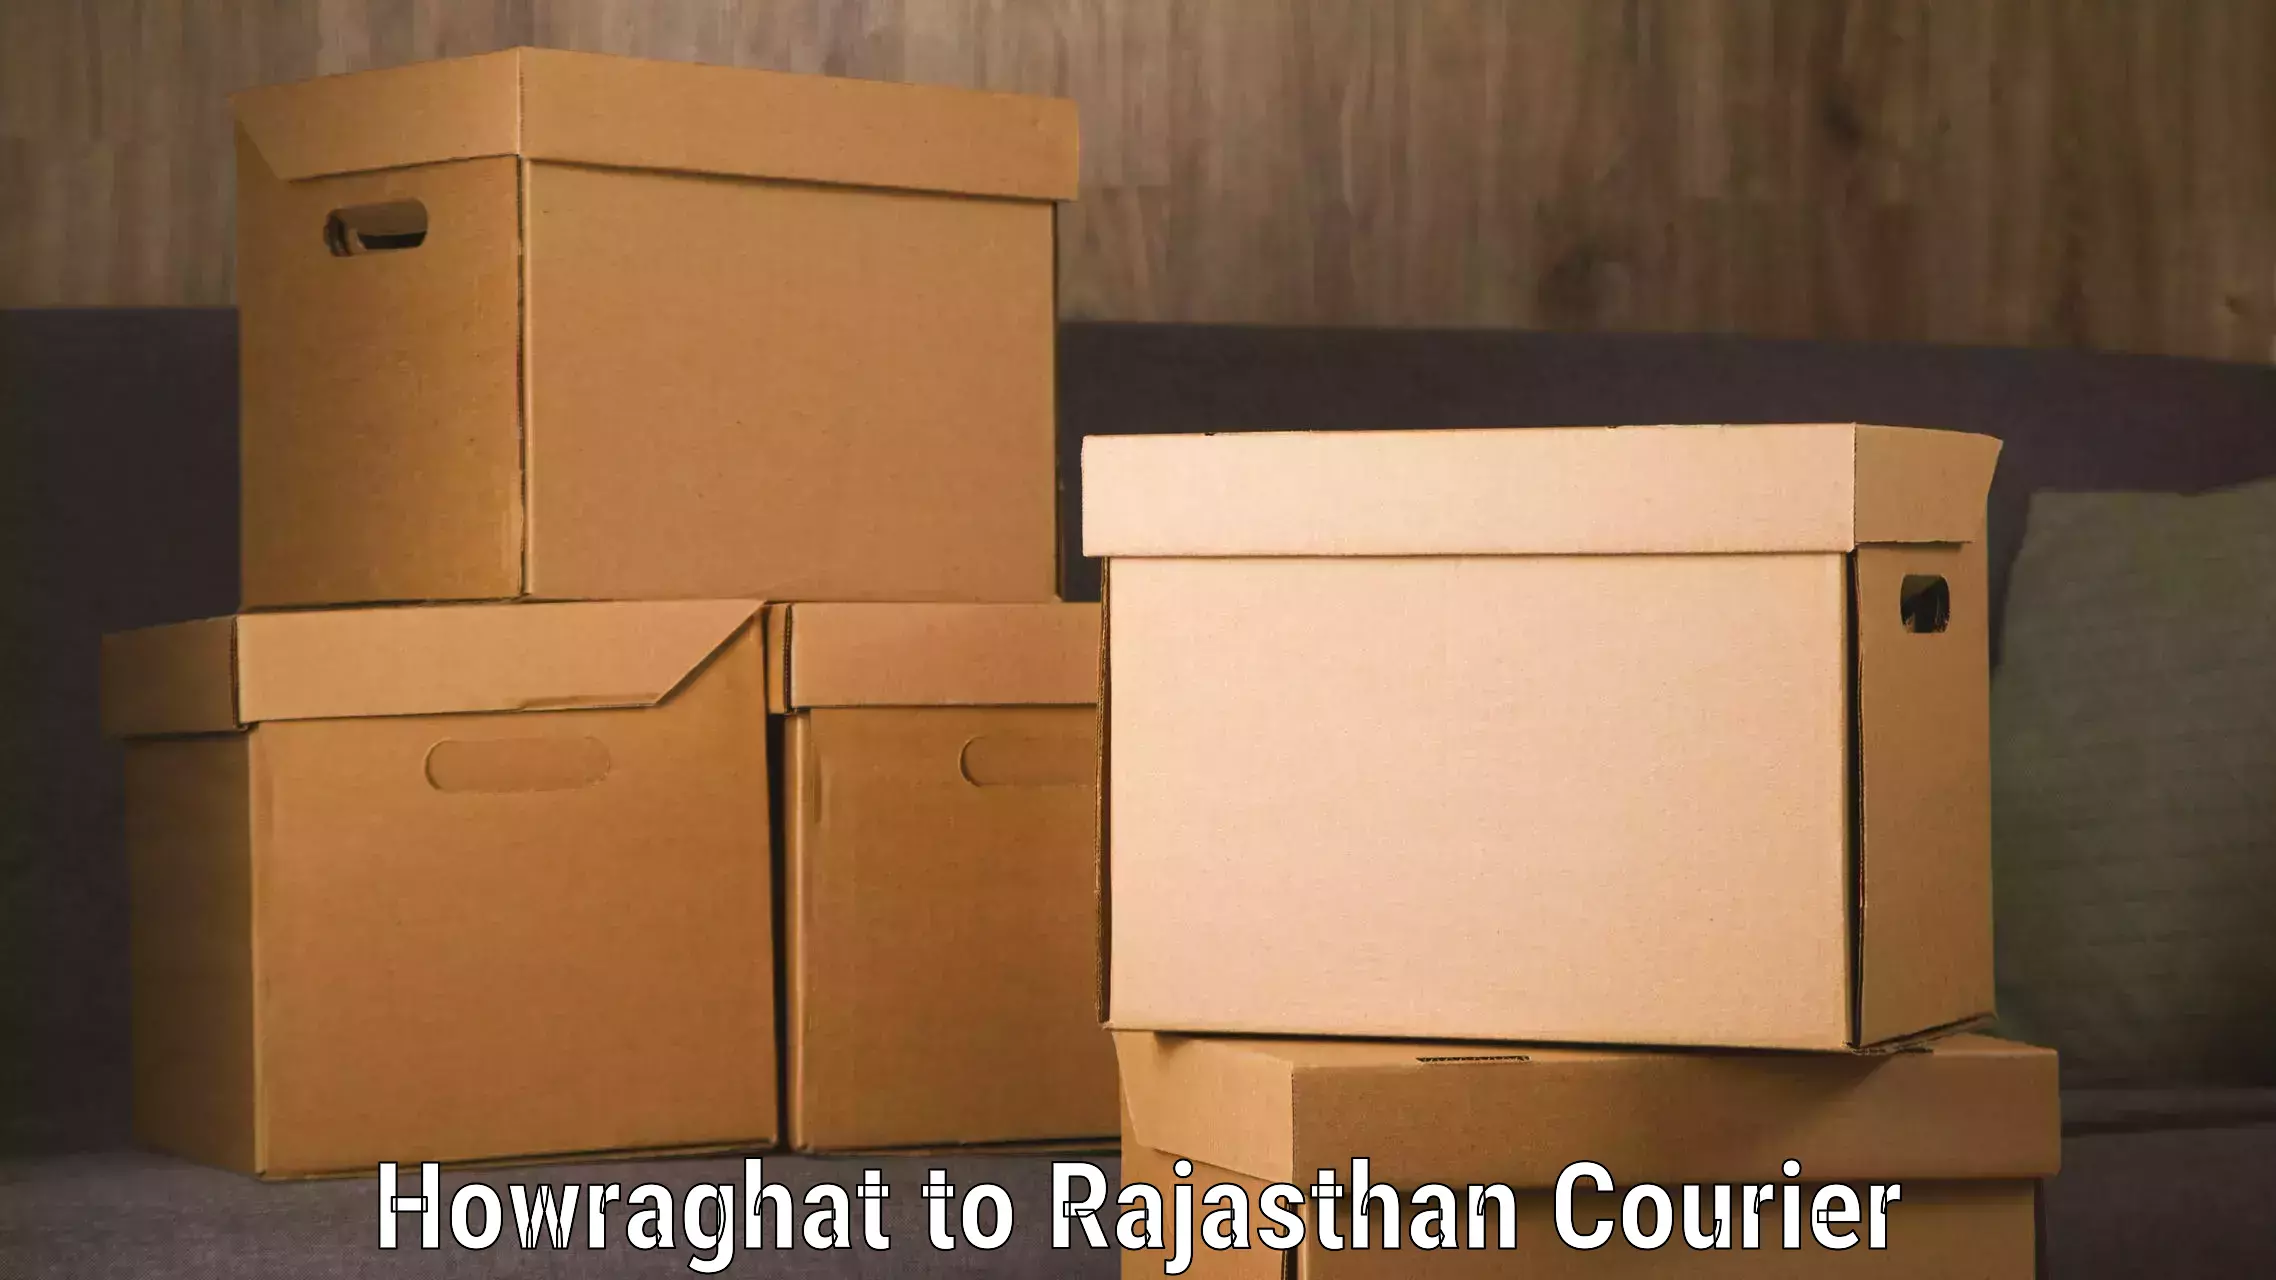 Direct baggage courier Howraghat to Raisingh Nagar